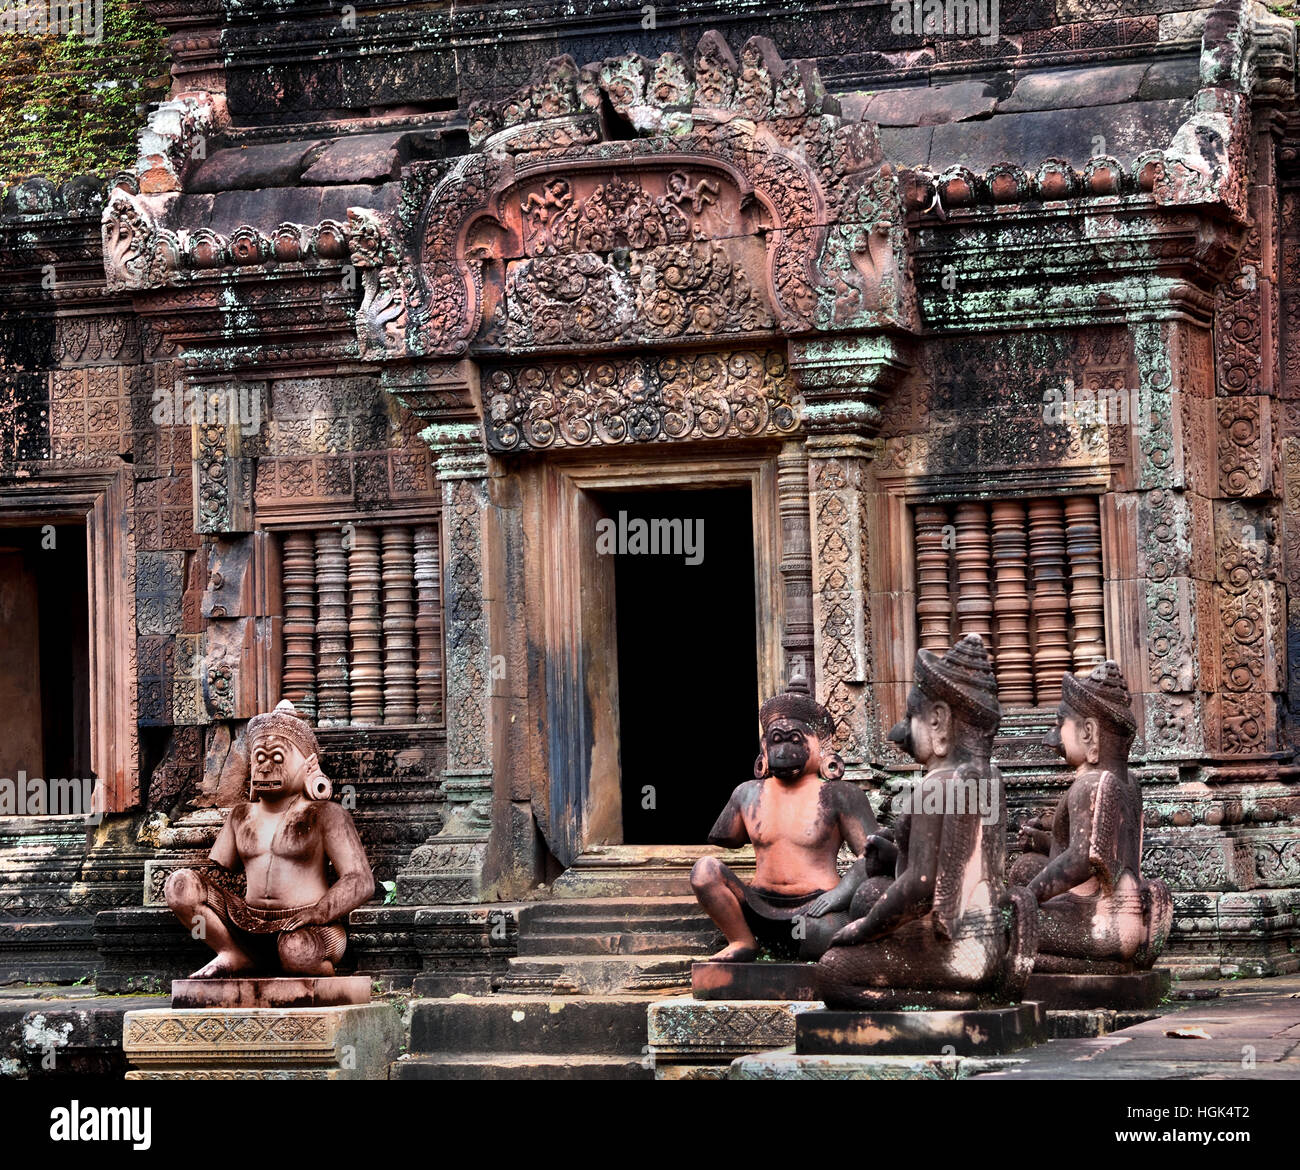 Banteay Srei - Srey Cambodian Temple 10th century Hindu temple dedicated to Shiva. Siem Reap, Cambodia ( Angkor complex different archaeological capitals Khmer Empire 9-15th century ) Stock Photo